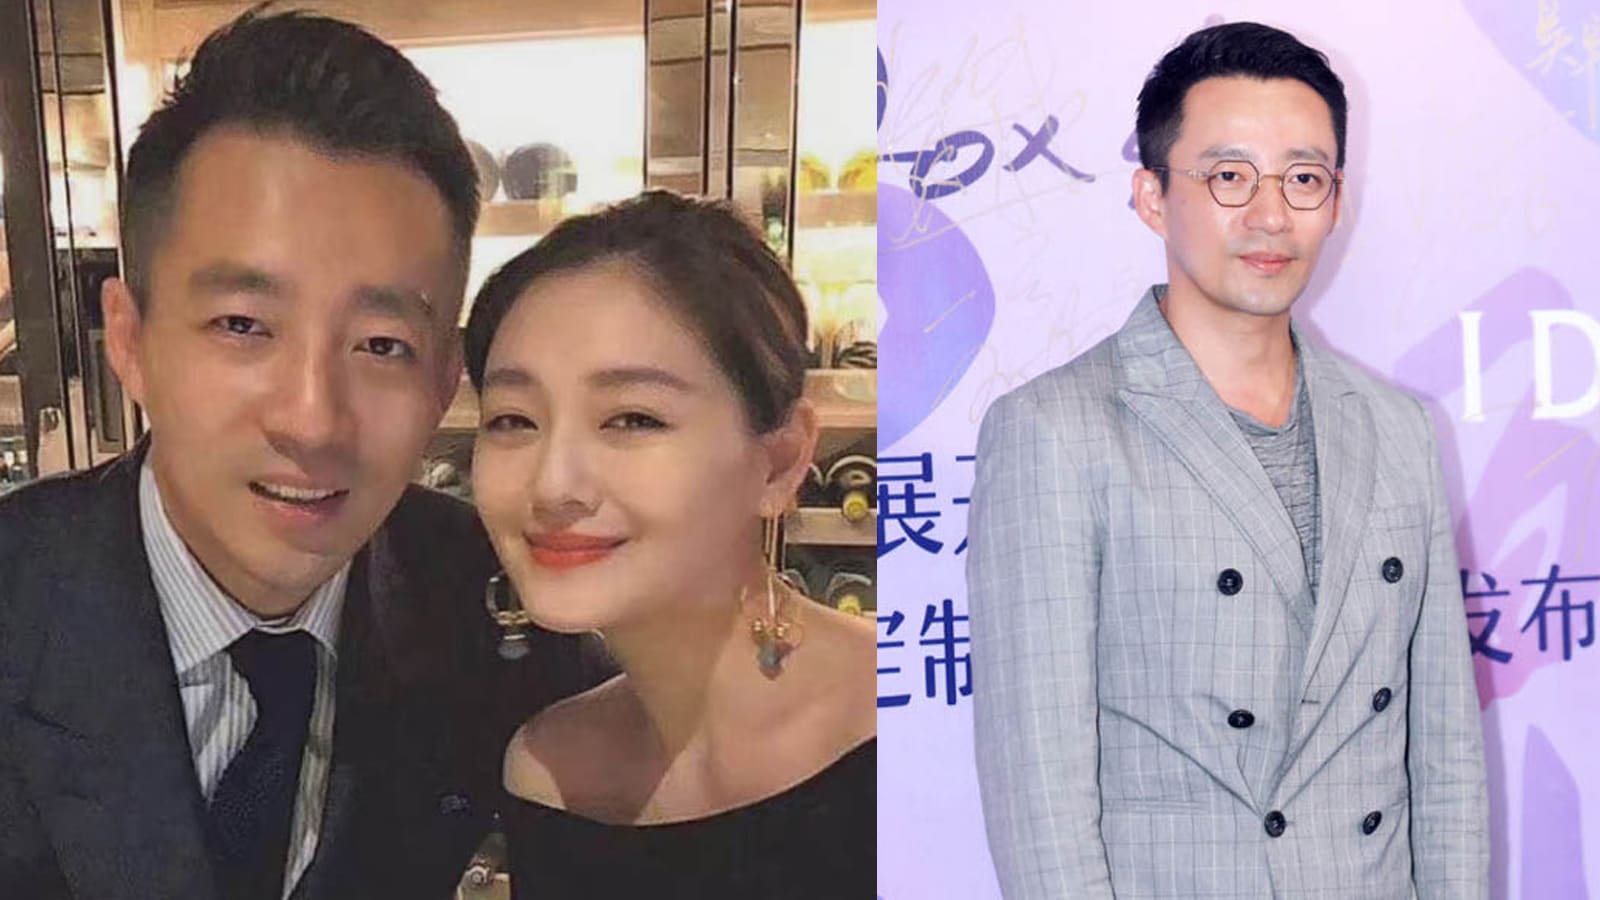 Wang Xiaofei Removes All Trace Of Barbie Hsu From His Douyin, Netizens See It As A Sure Sign That The Couple Are Divorced